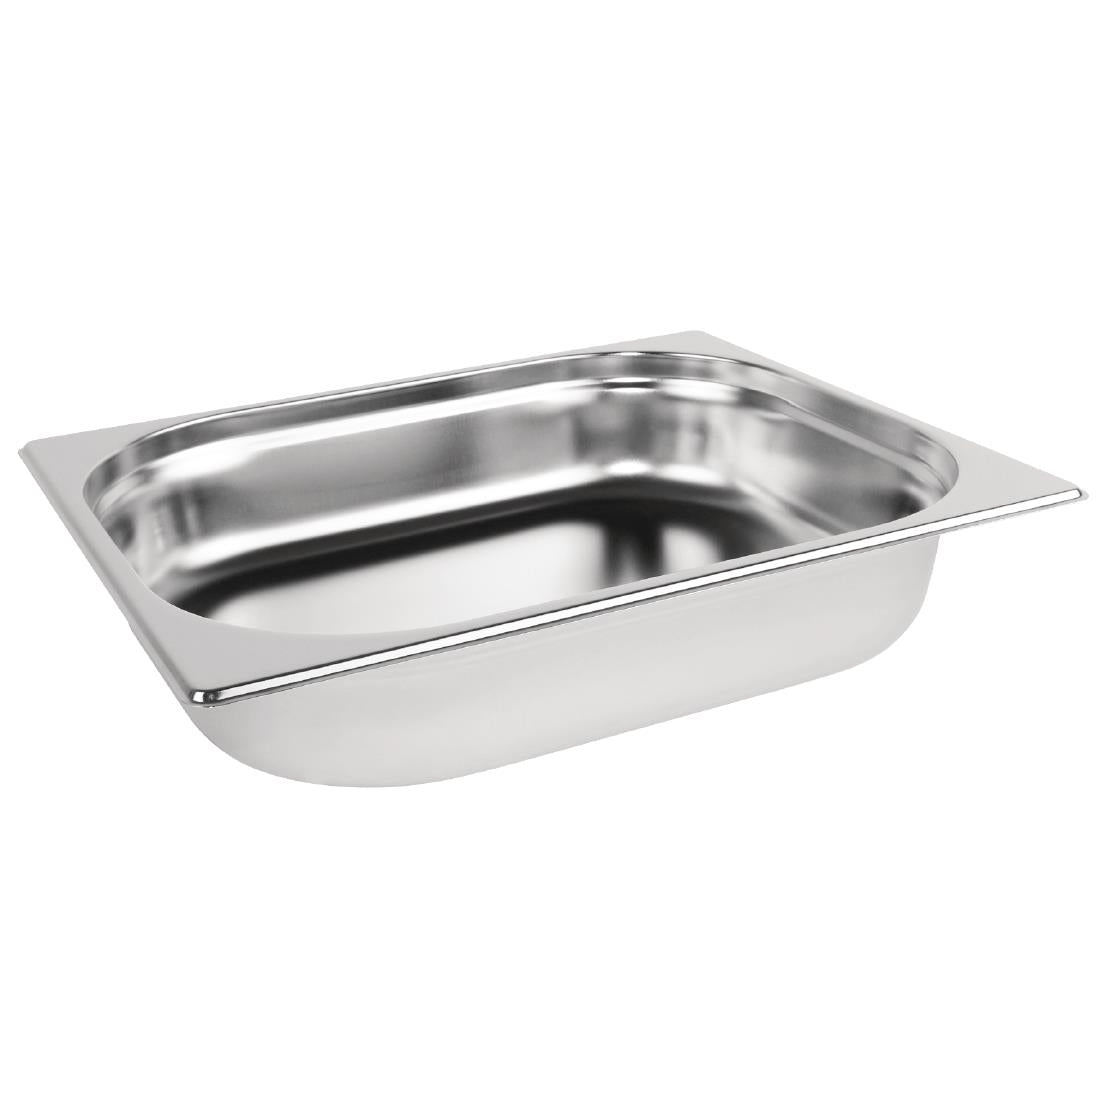 Pack of 6 Stainless Steel Gastronorm Pan 1/2 40mm Deep